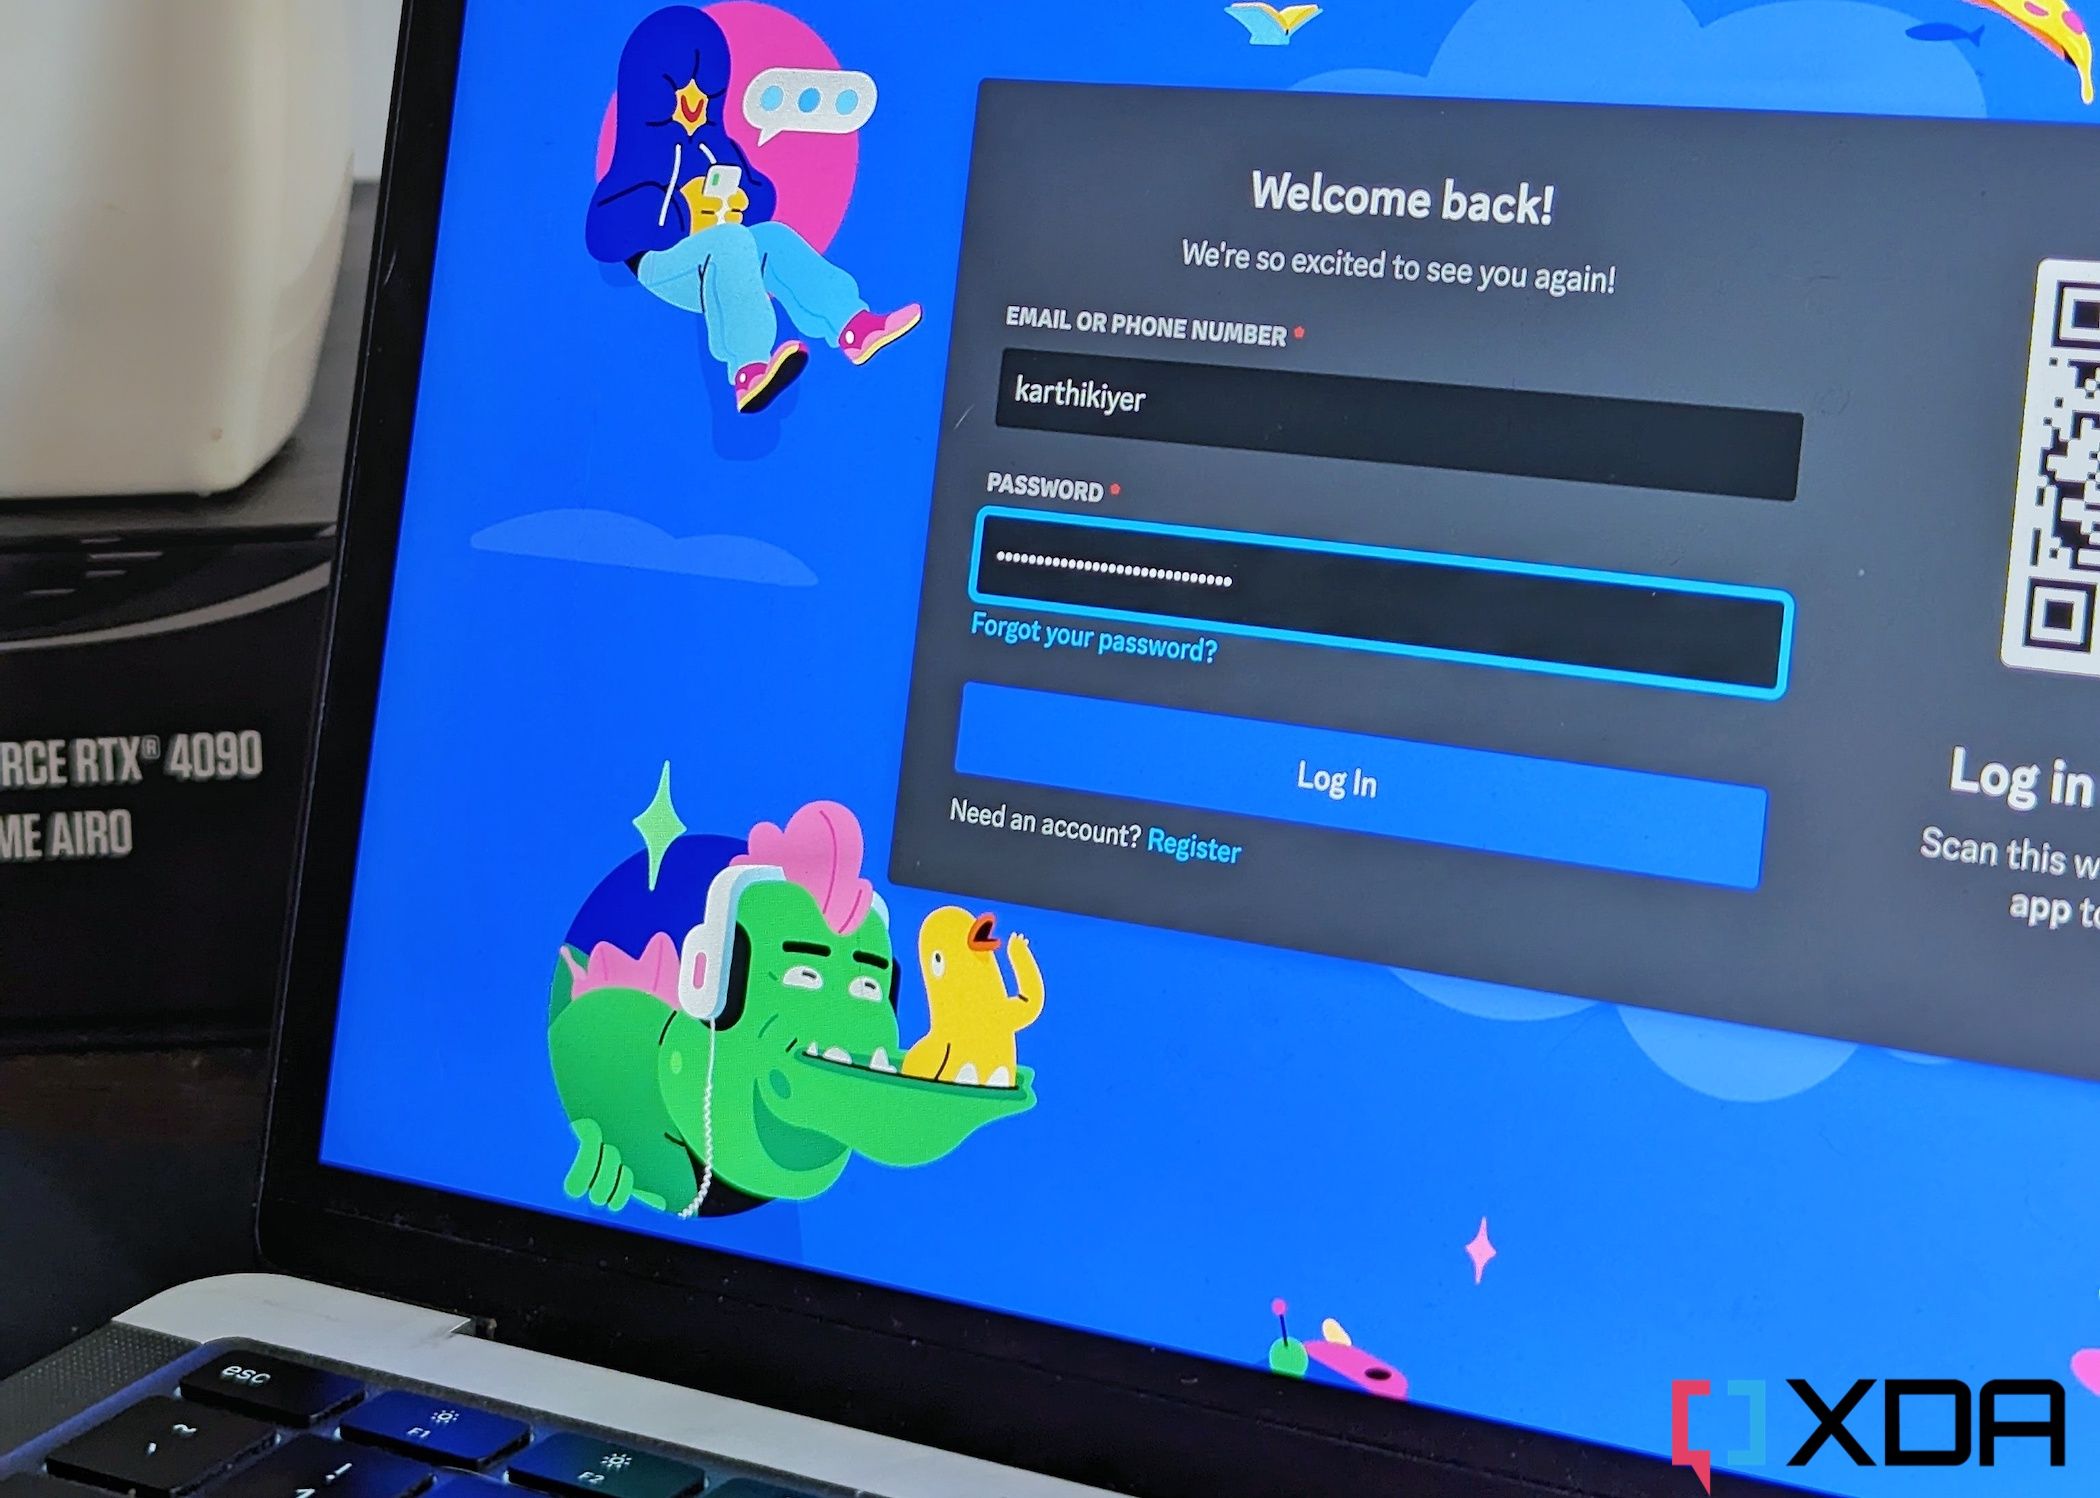 An image showing the login page of discord on a MacBook Air's display.